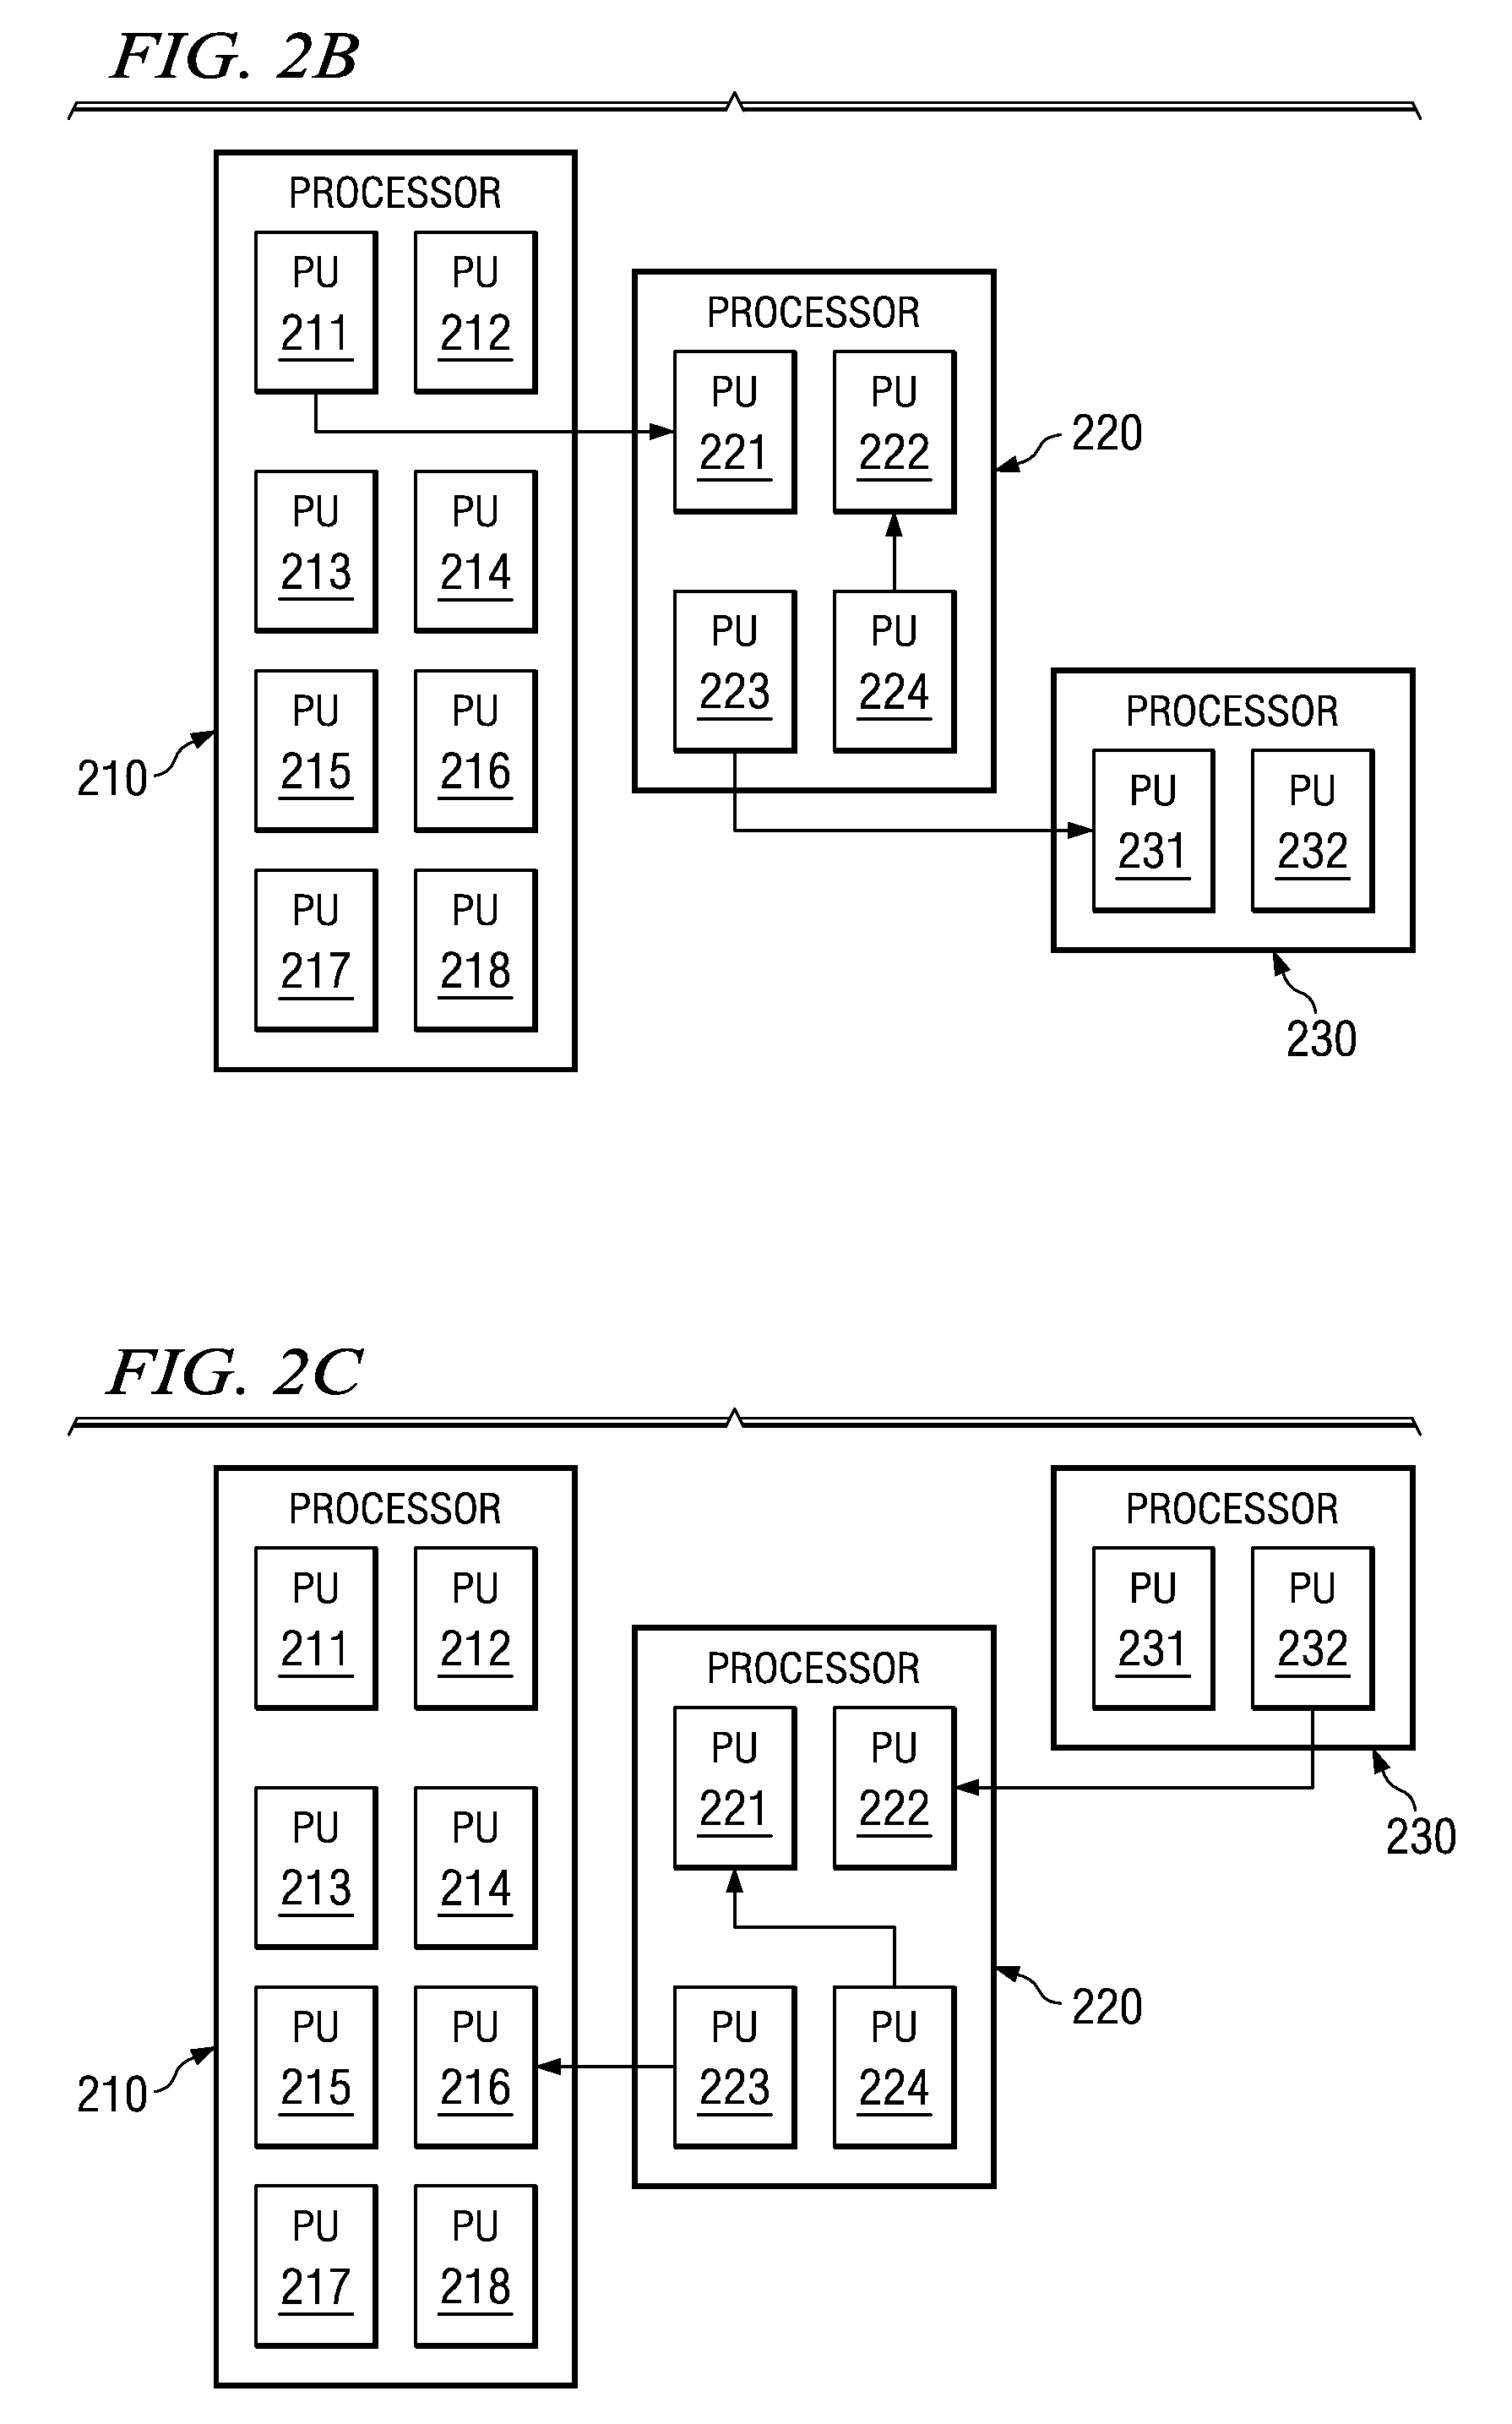 Scheduling tasks across multiple processor units of differing capacity